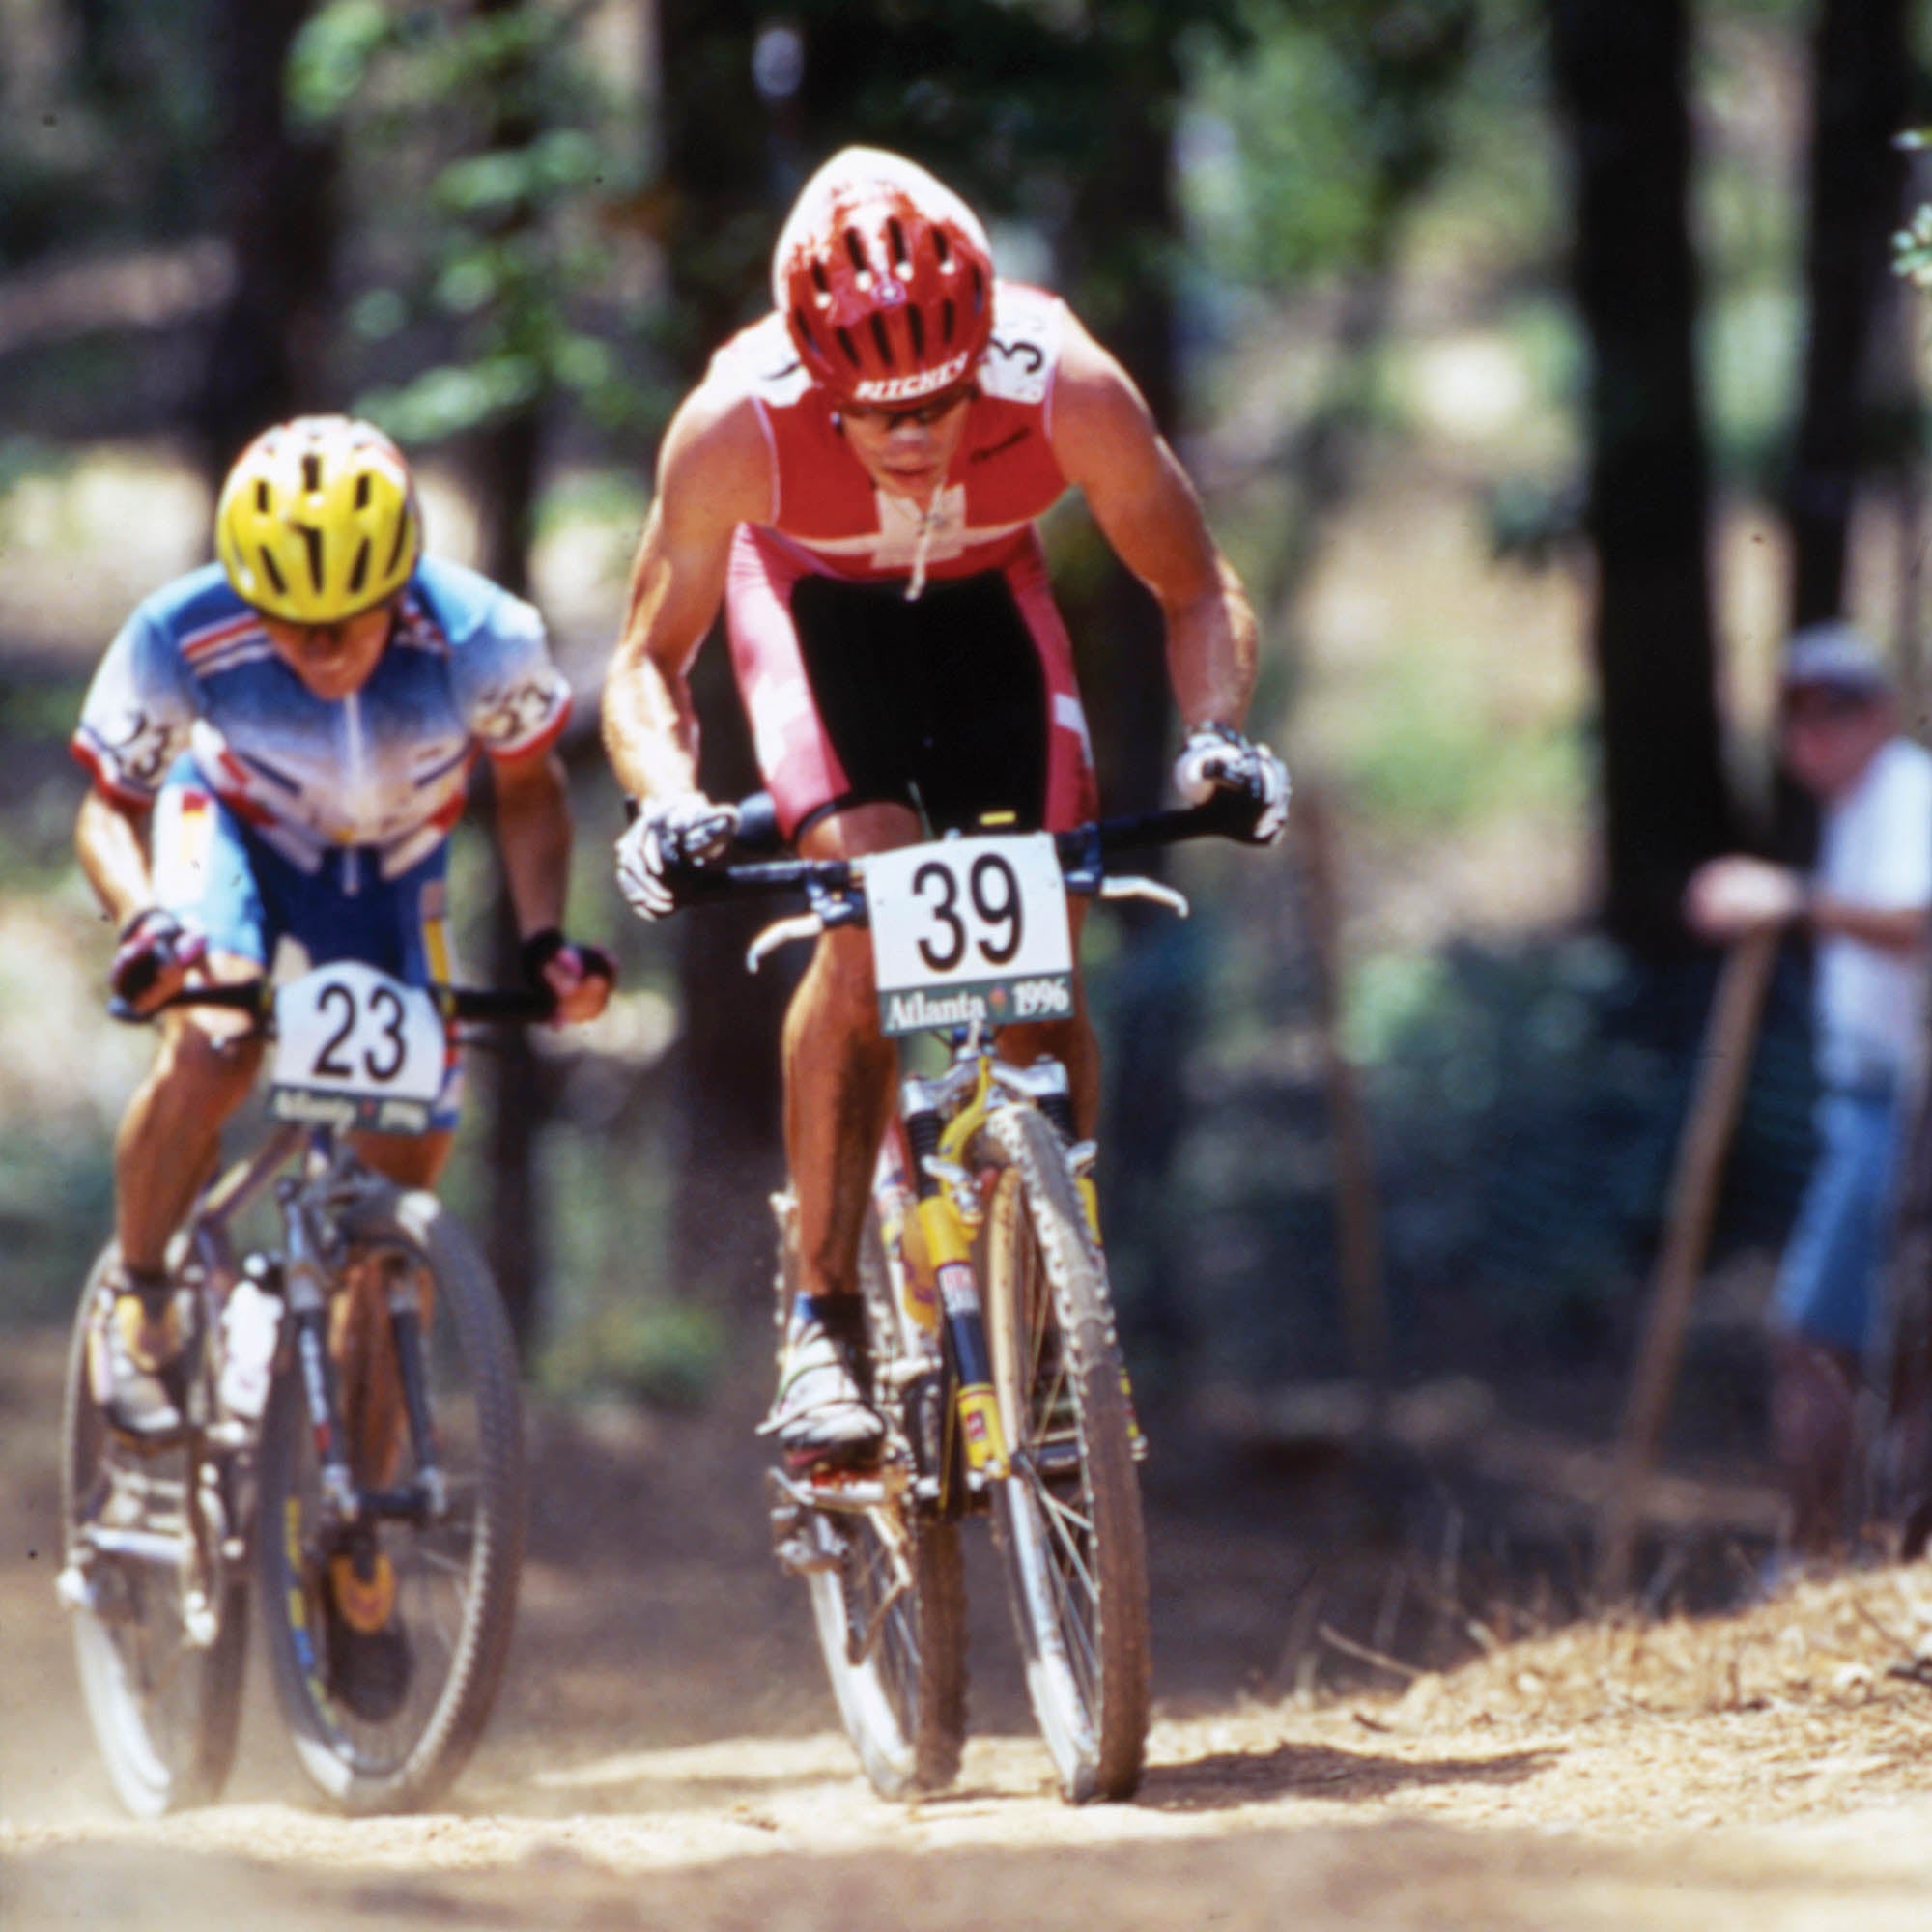 Frischknecht competing in mountain bike in the Olympics